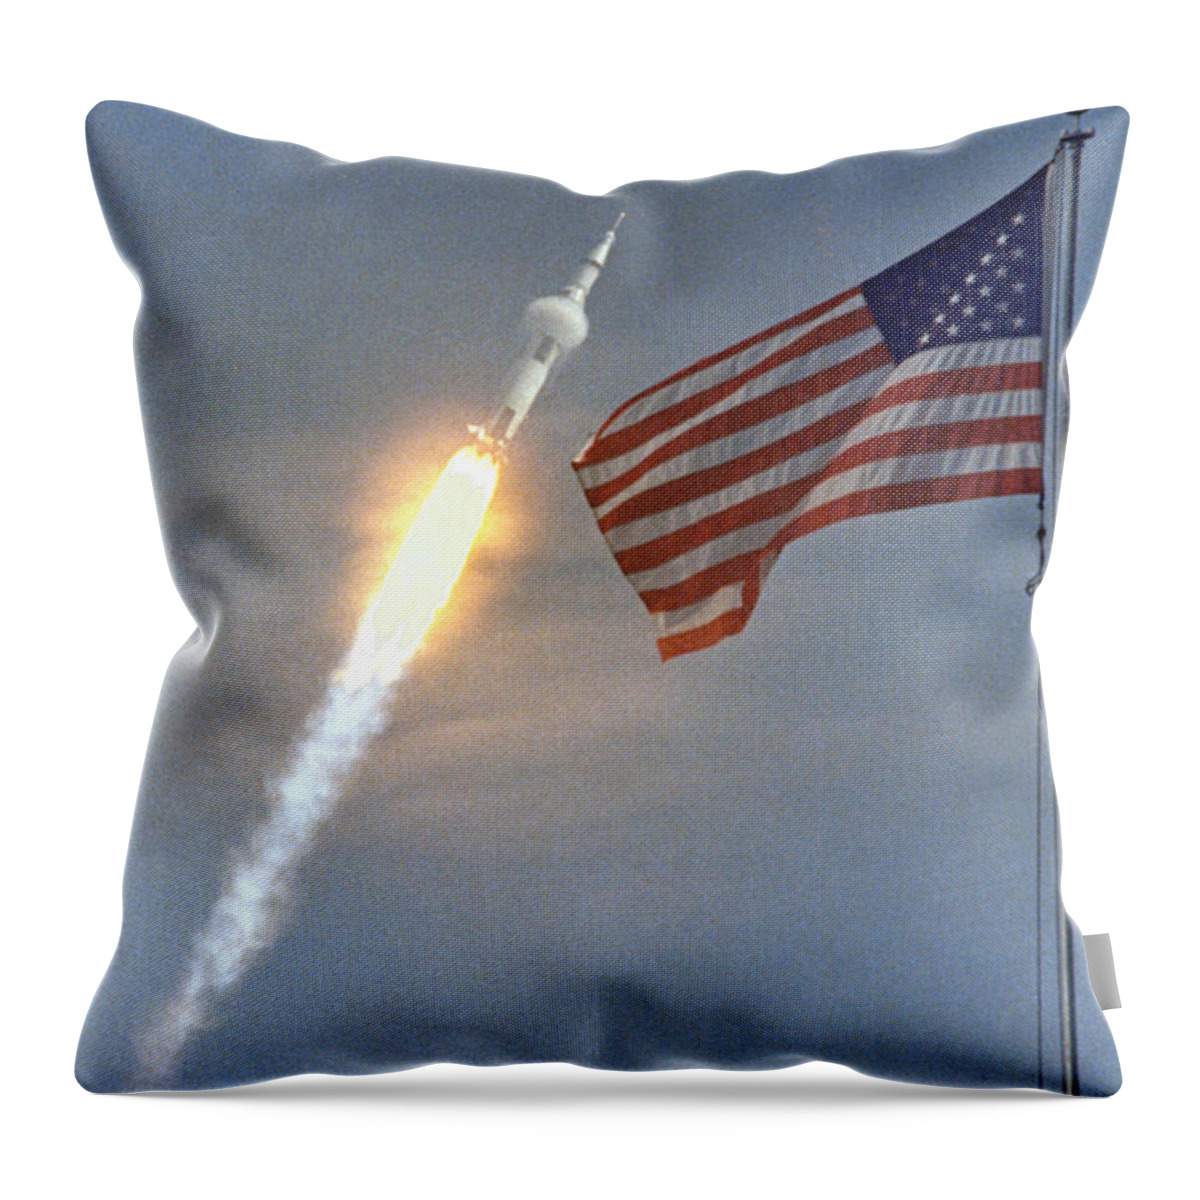 1969 Throw Pillow featuring the photograph Apollo 11 Launch, 1969 by Science Source